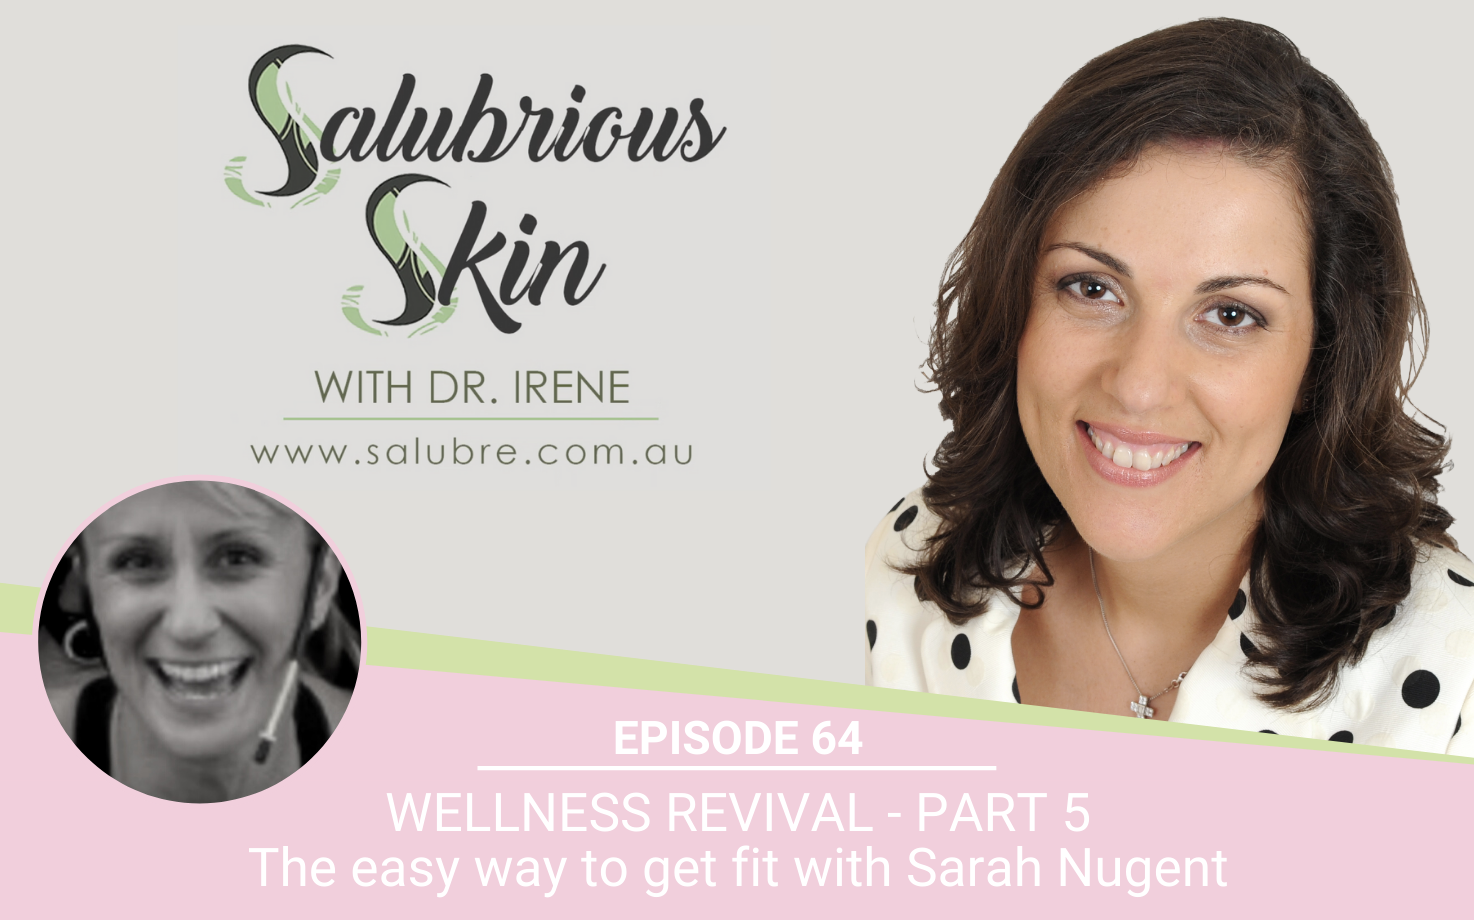 Podcast 64: Wellness Revival - Part 5: The easy way to get fit with Sarah Nugent